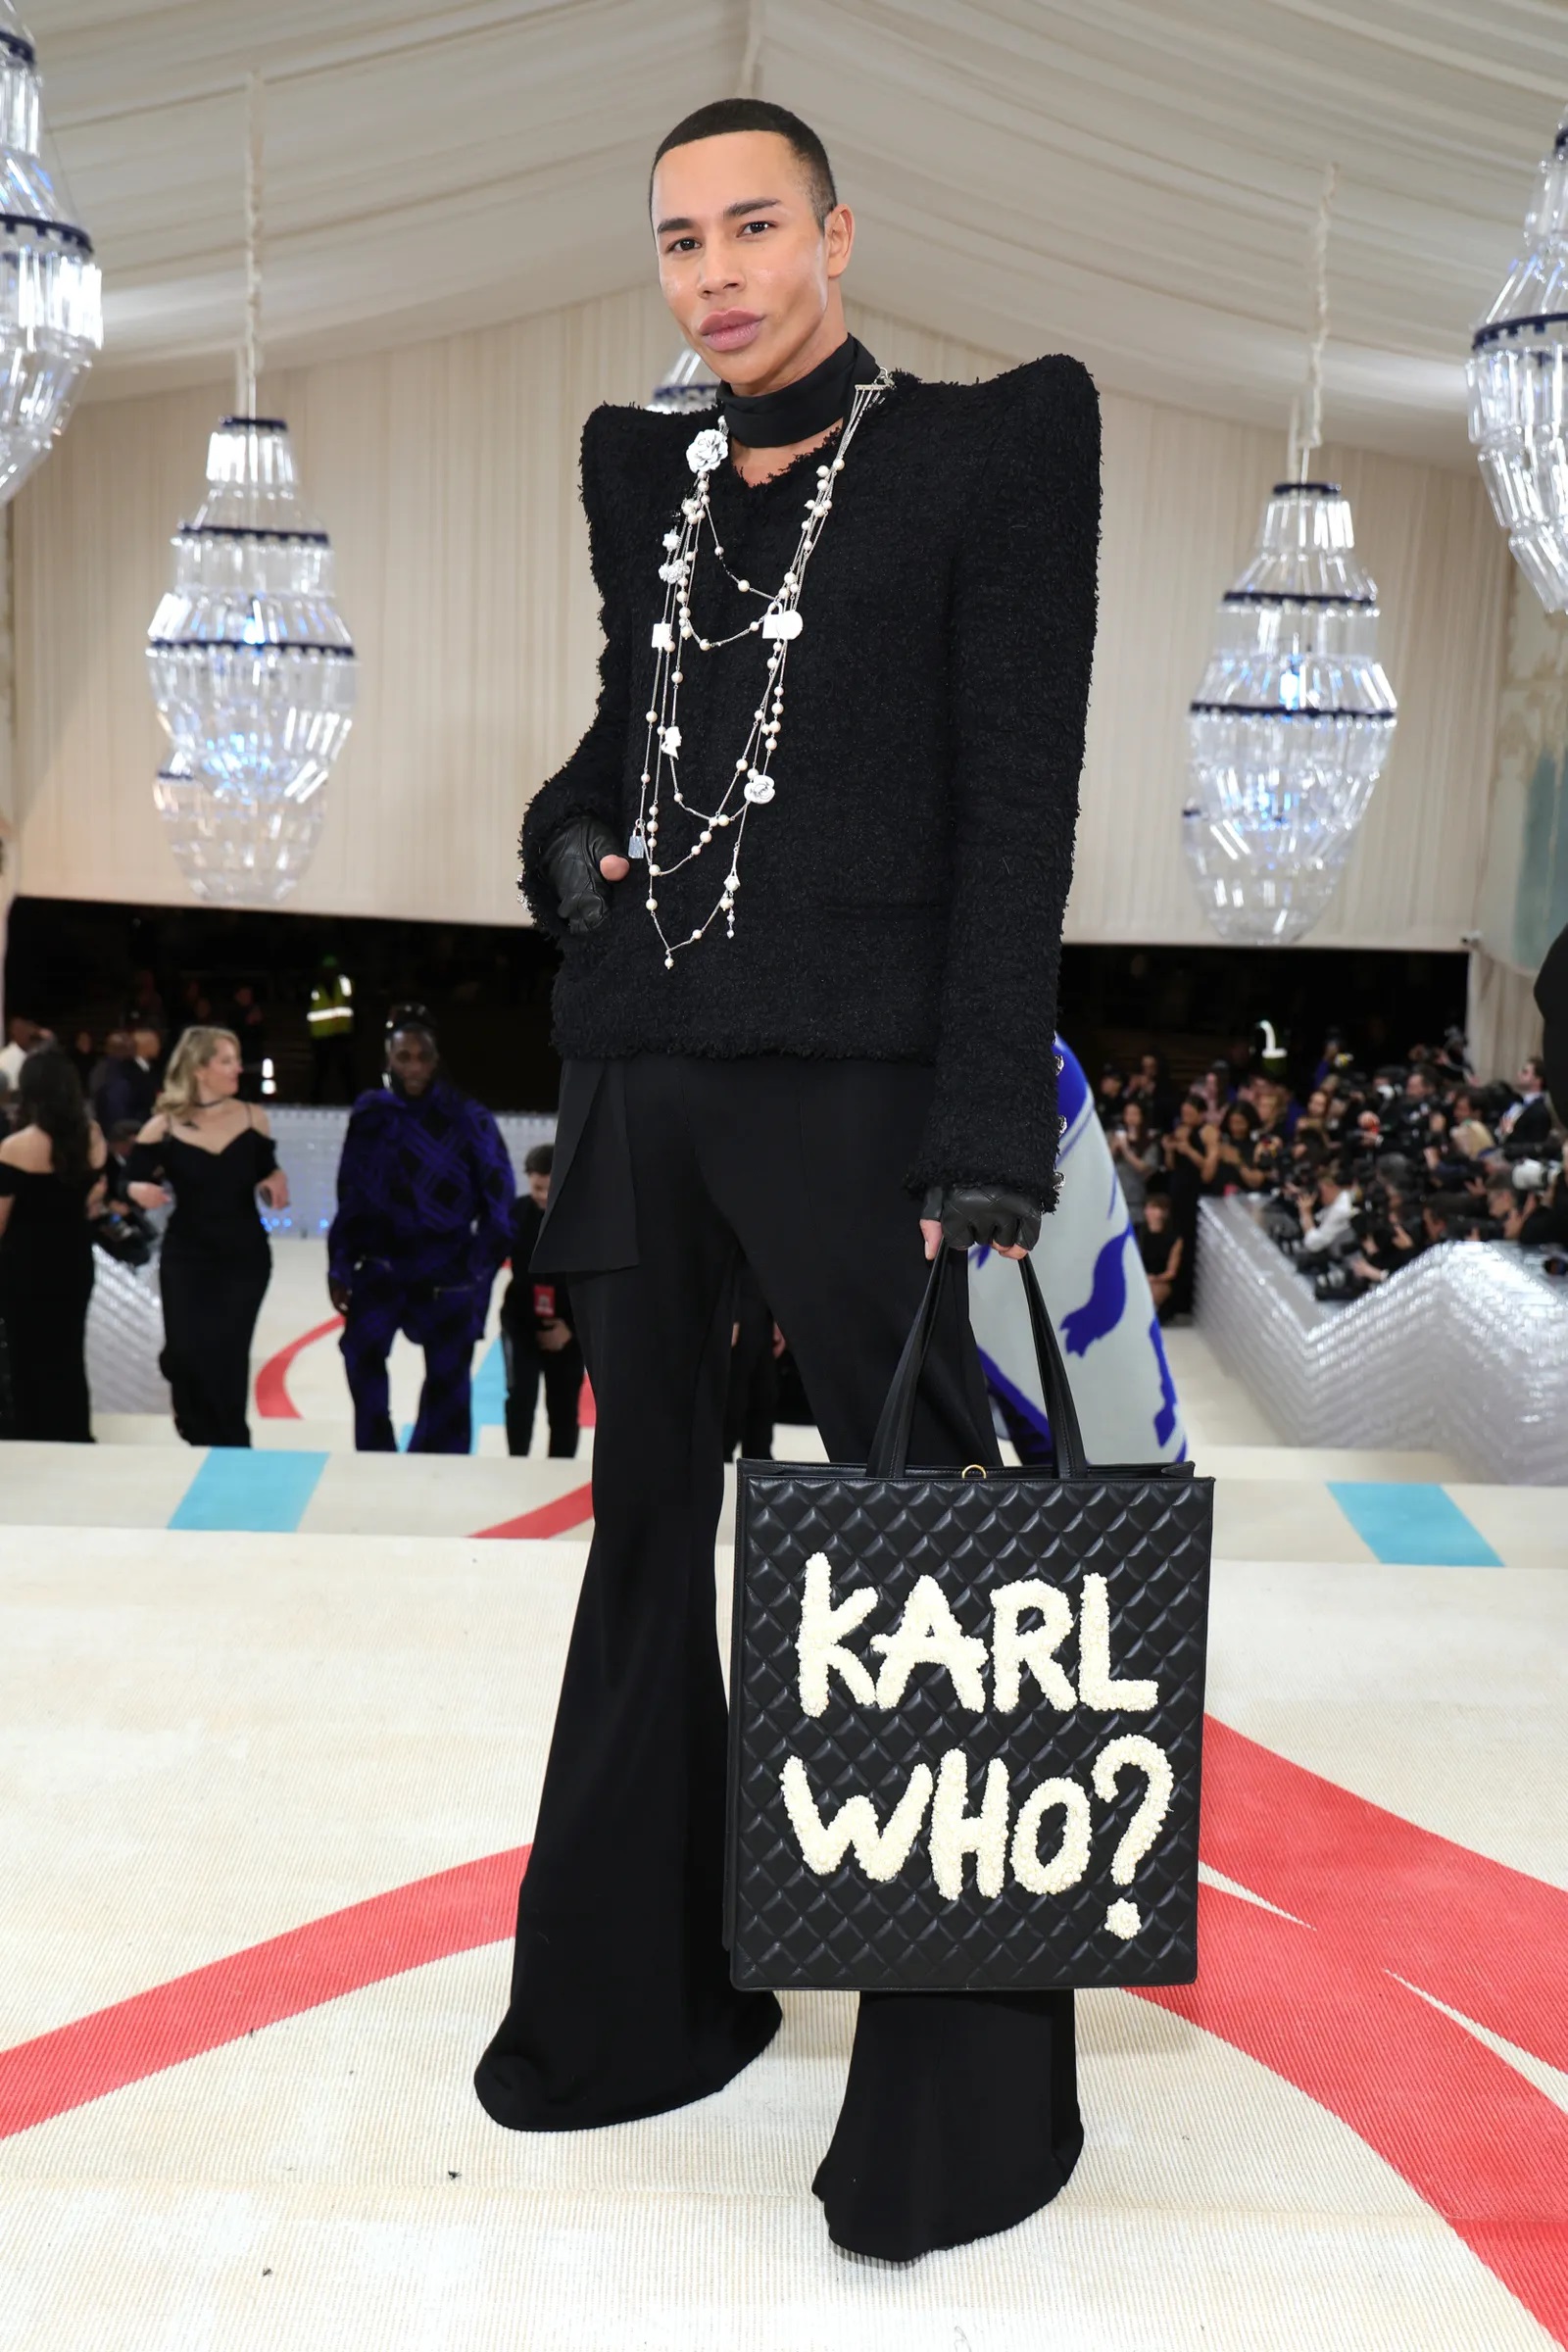 balmain_s_creative_director_olivier_rousteing_wore_a_handbag_with_the_words_karl_who_sprayed_painted.jpg